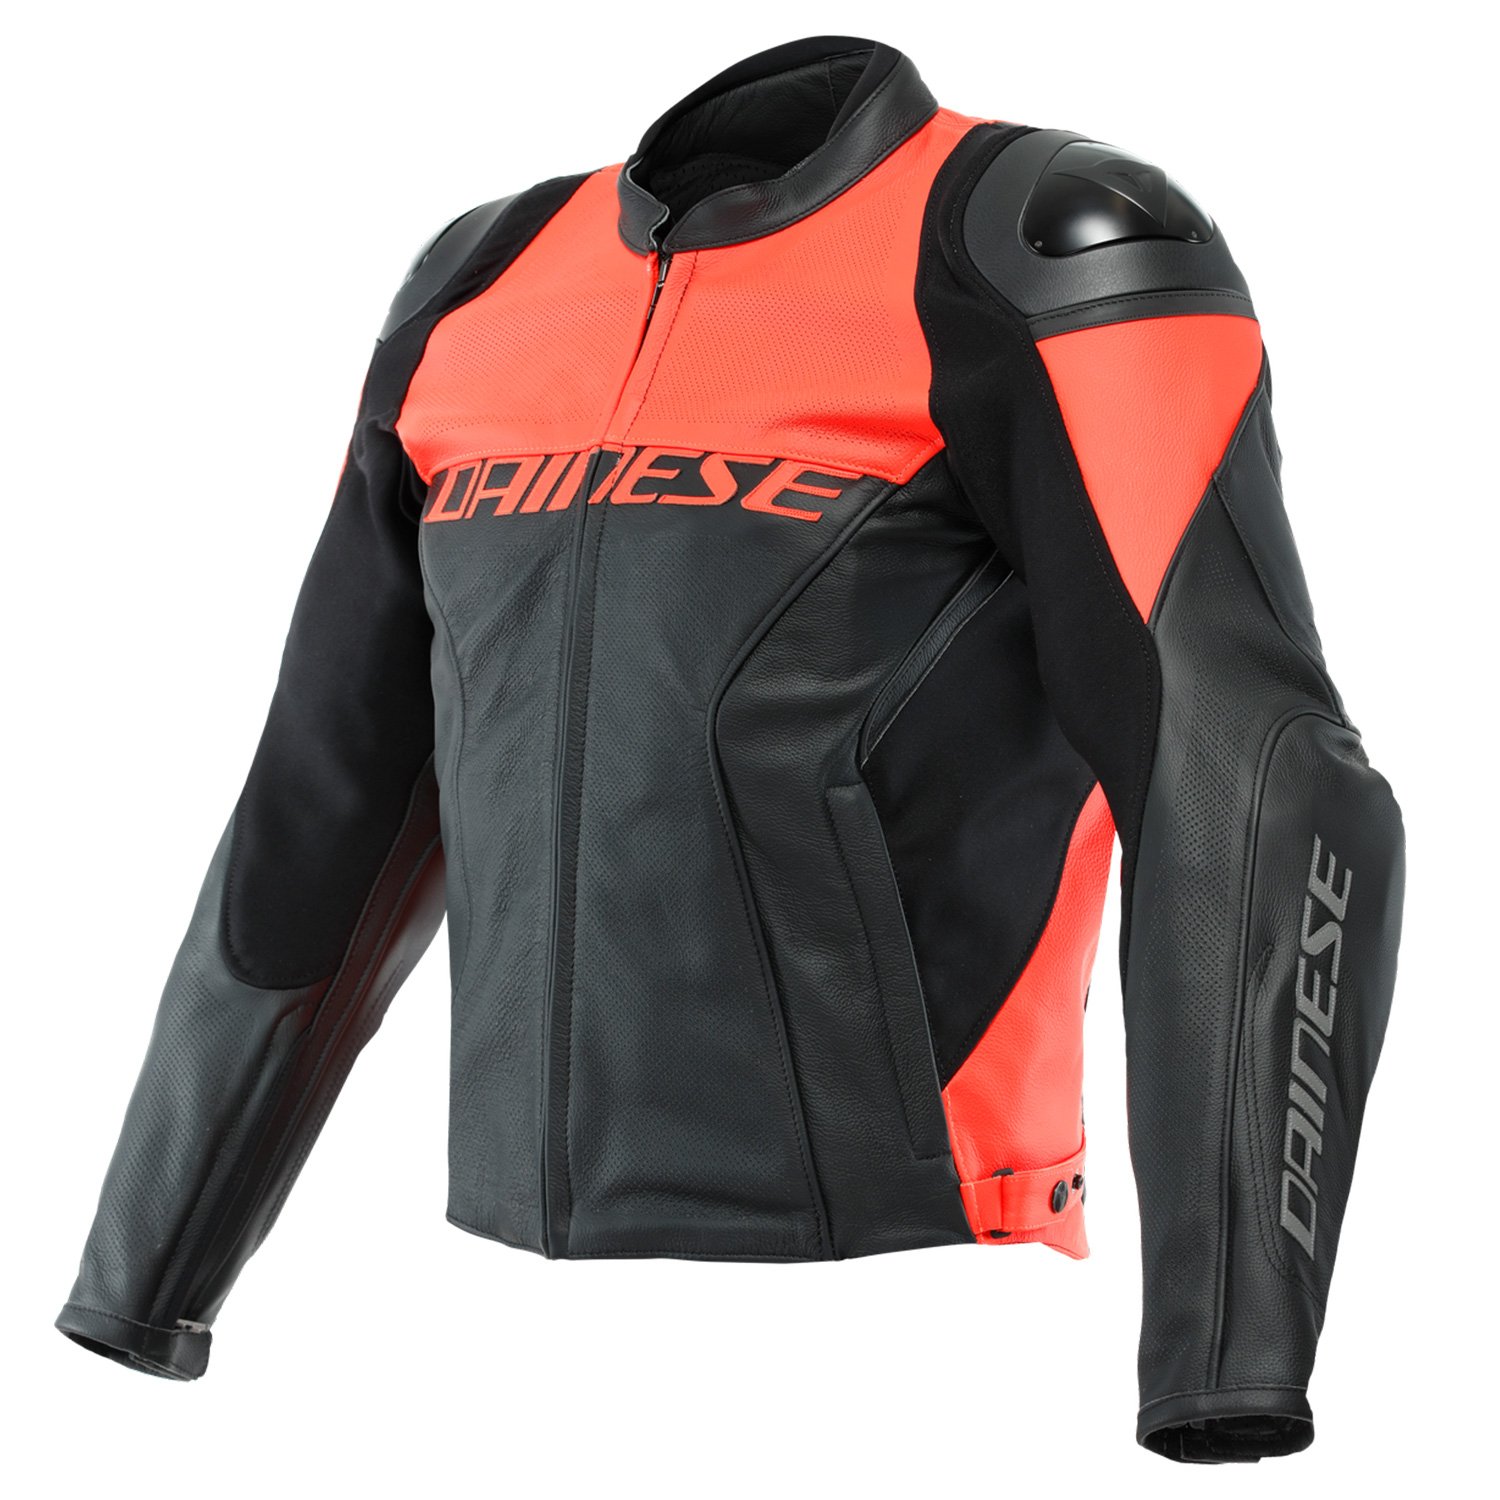 Image of Dainese Racing 4 Perforated Leather Jacket Black Fluo Red Size 50 ID 8051019302939